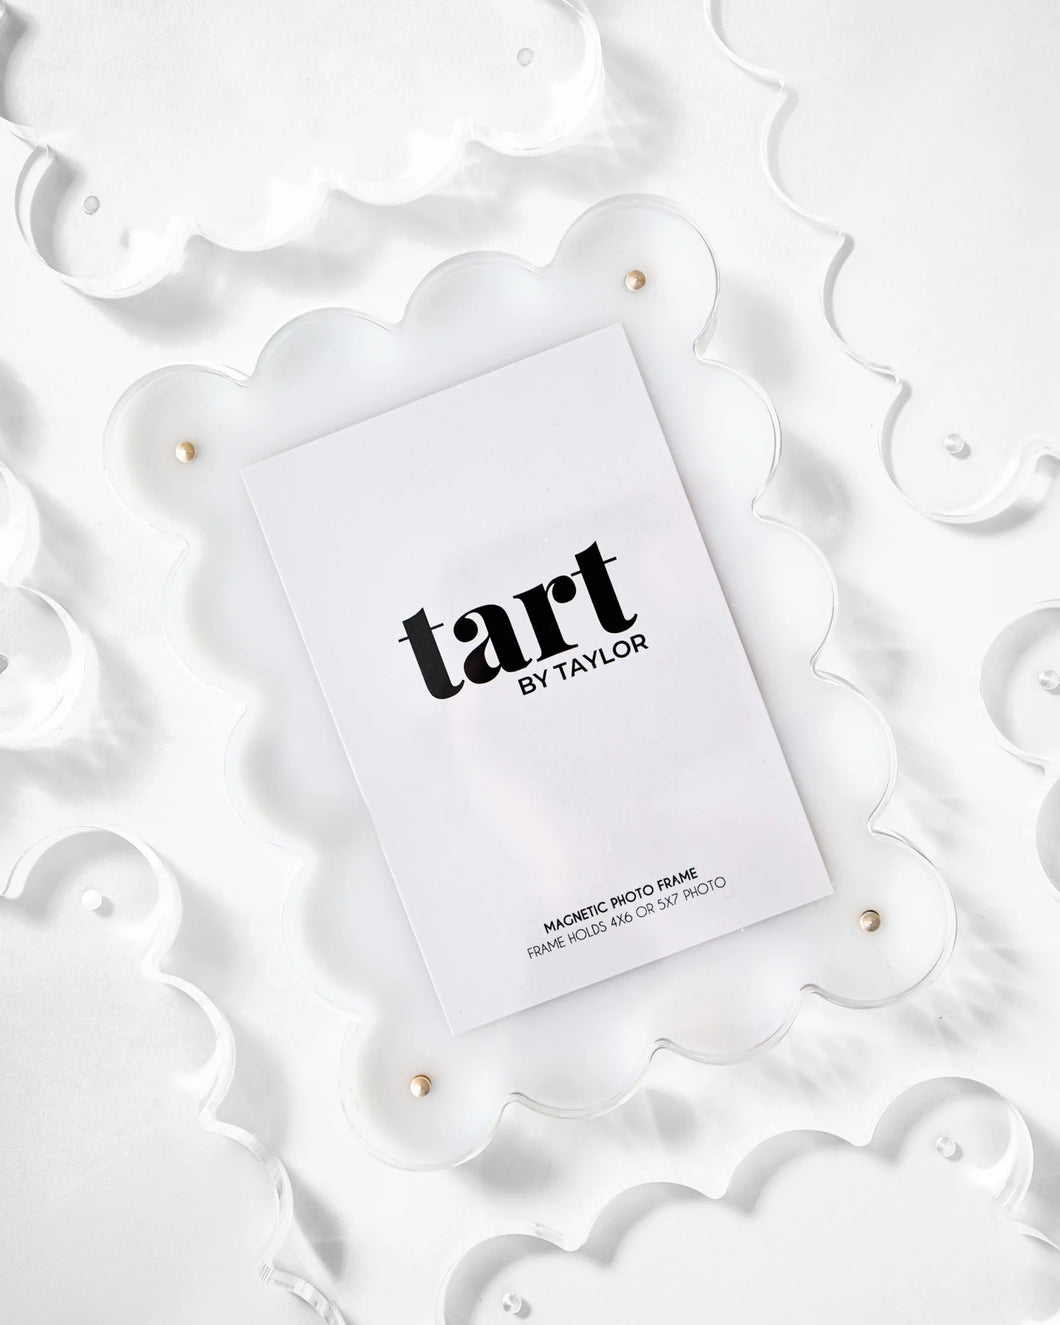 Tart by Taylor White Acrylic Picture Frame